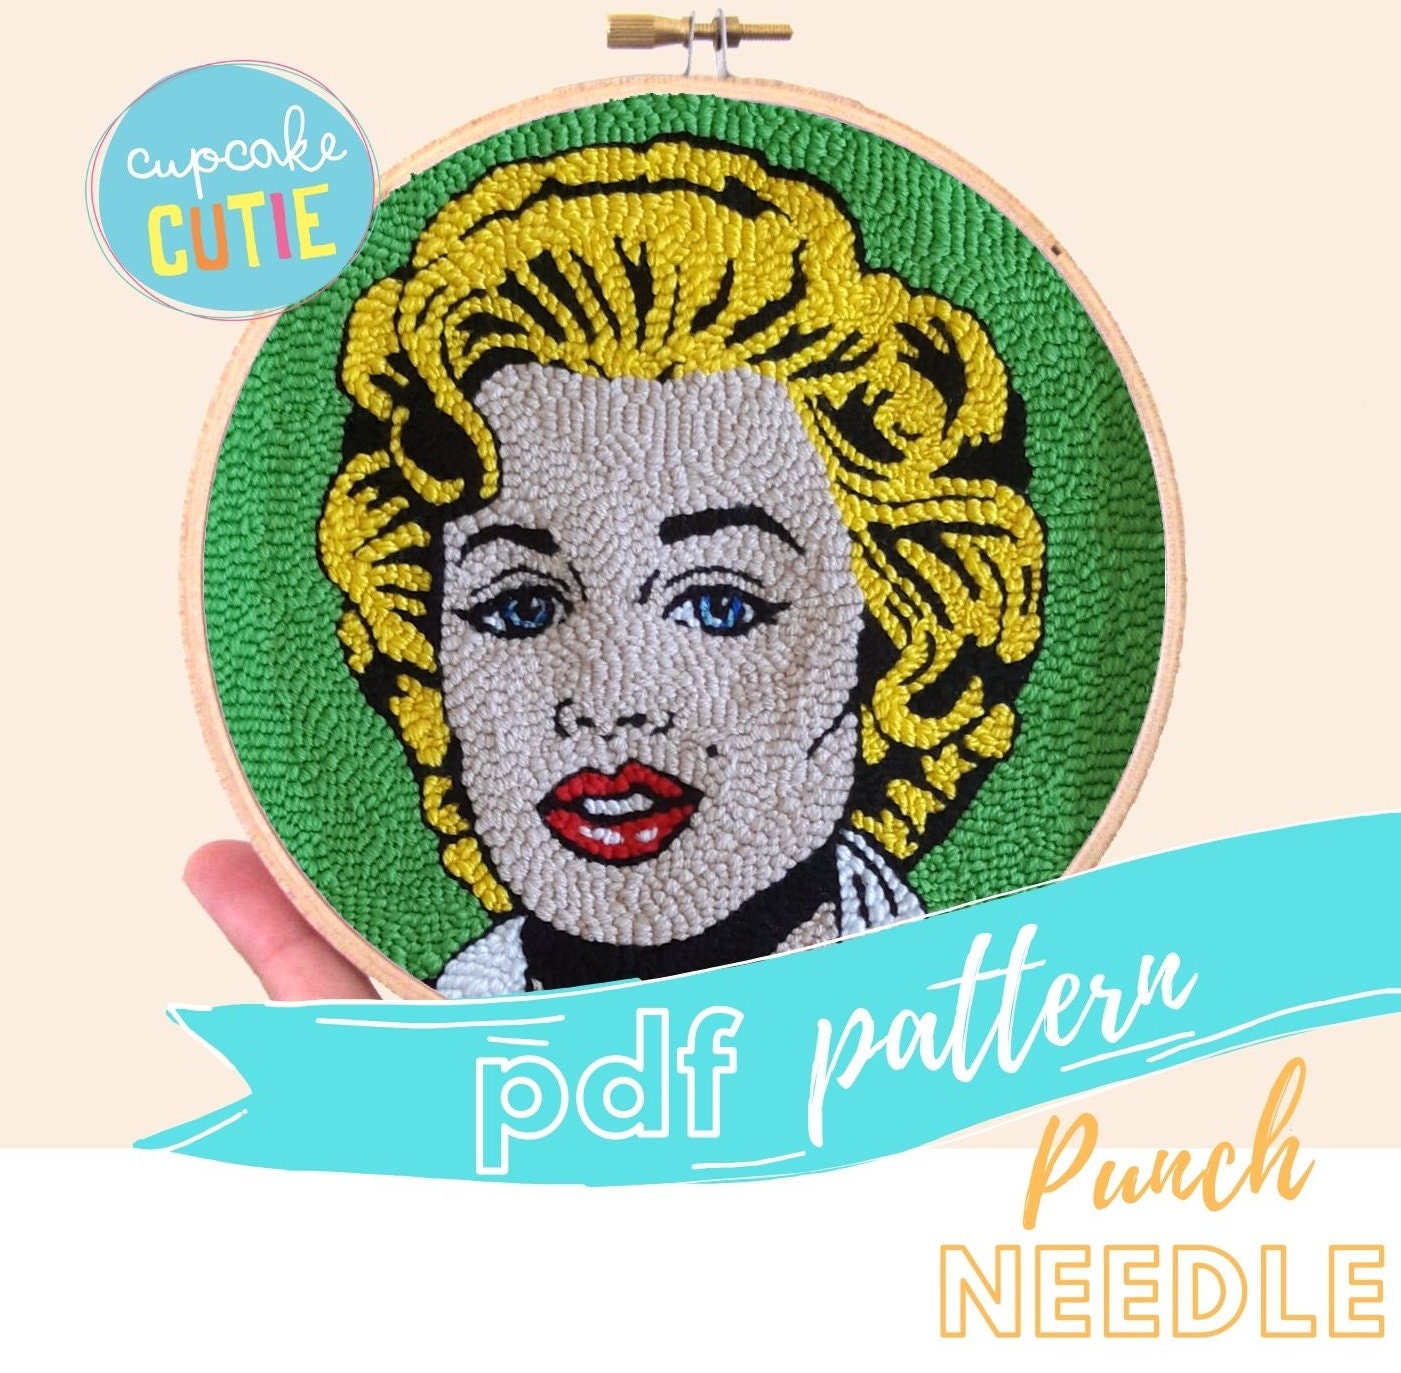 Marilyn Monroe Owned Needlepoint Purse Worn For